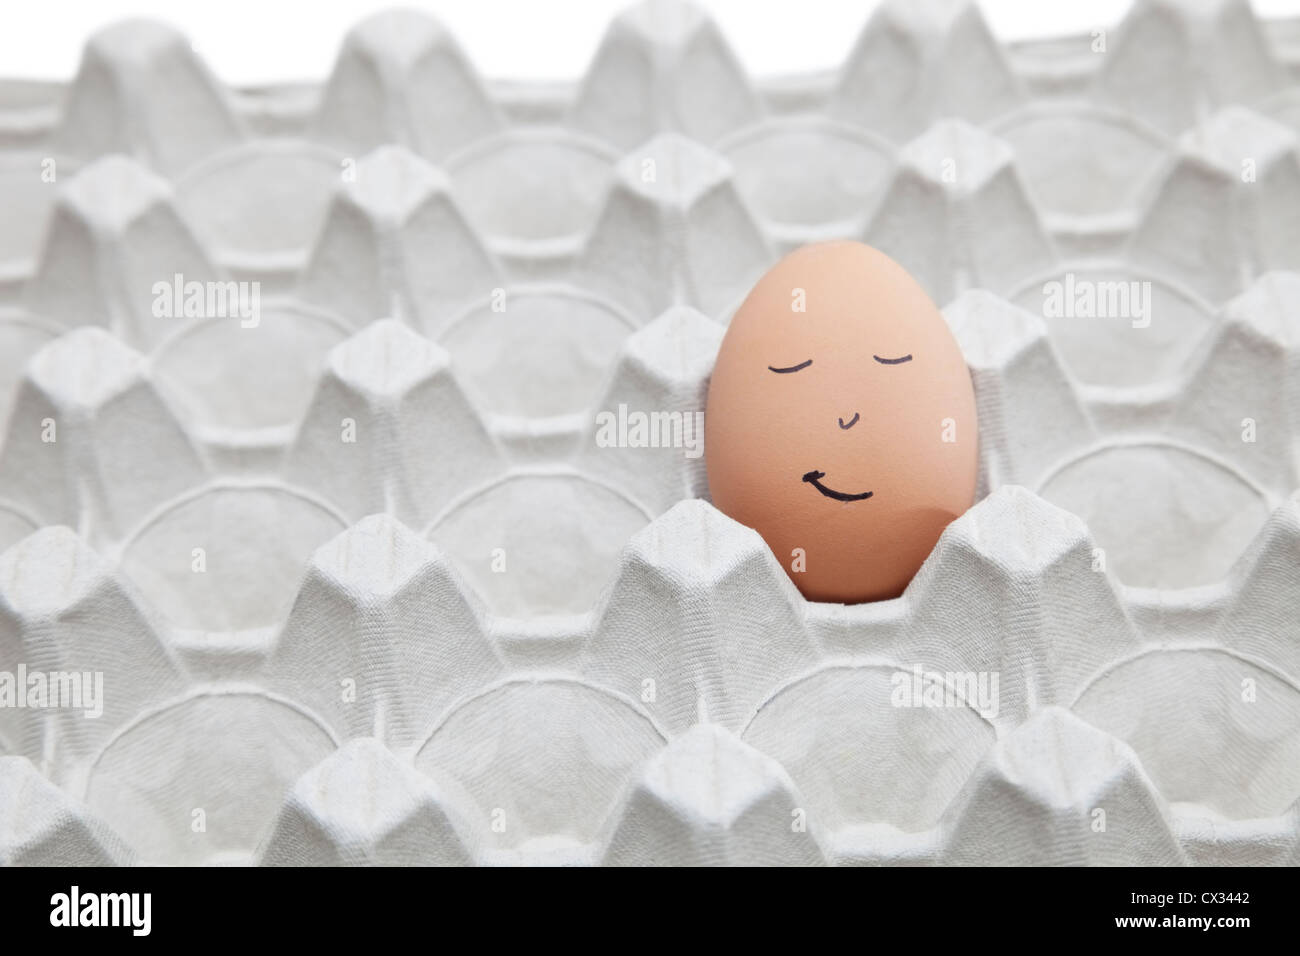 Anthropomorphic face drawn on brown egg in empty carton Stock Photo